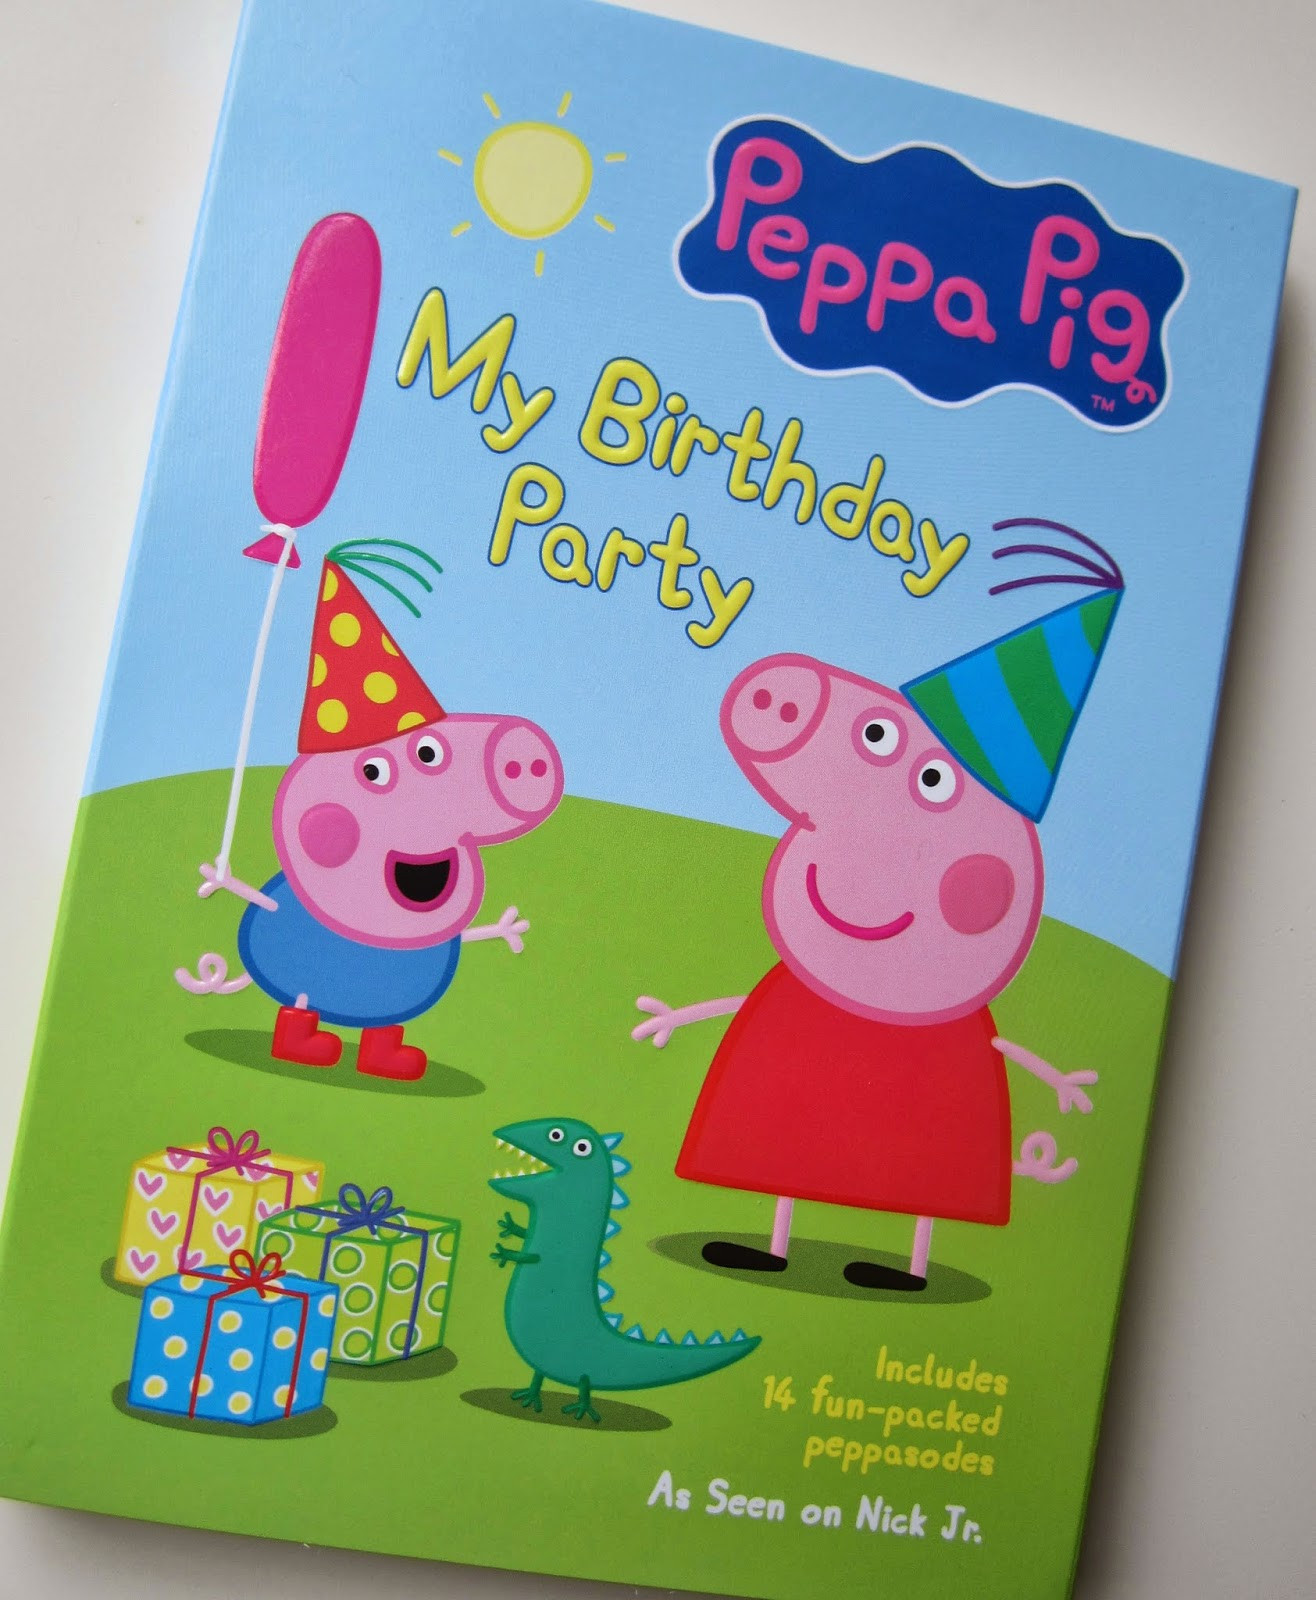 Peppa Pig My Birthday Party
 Peppa Pig My Birthday Party DVD Review and Giveaway